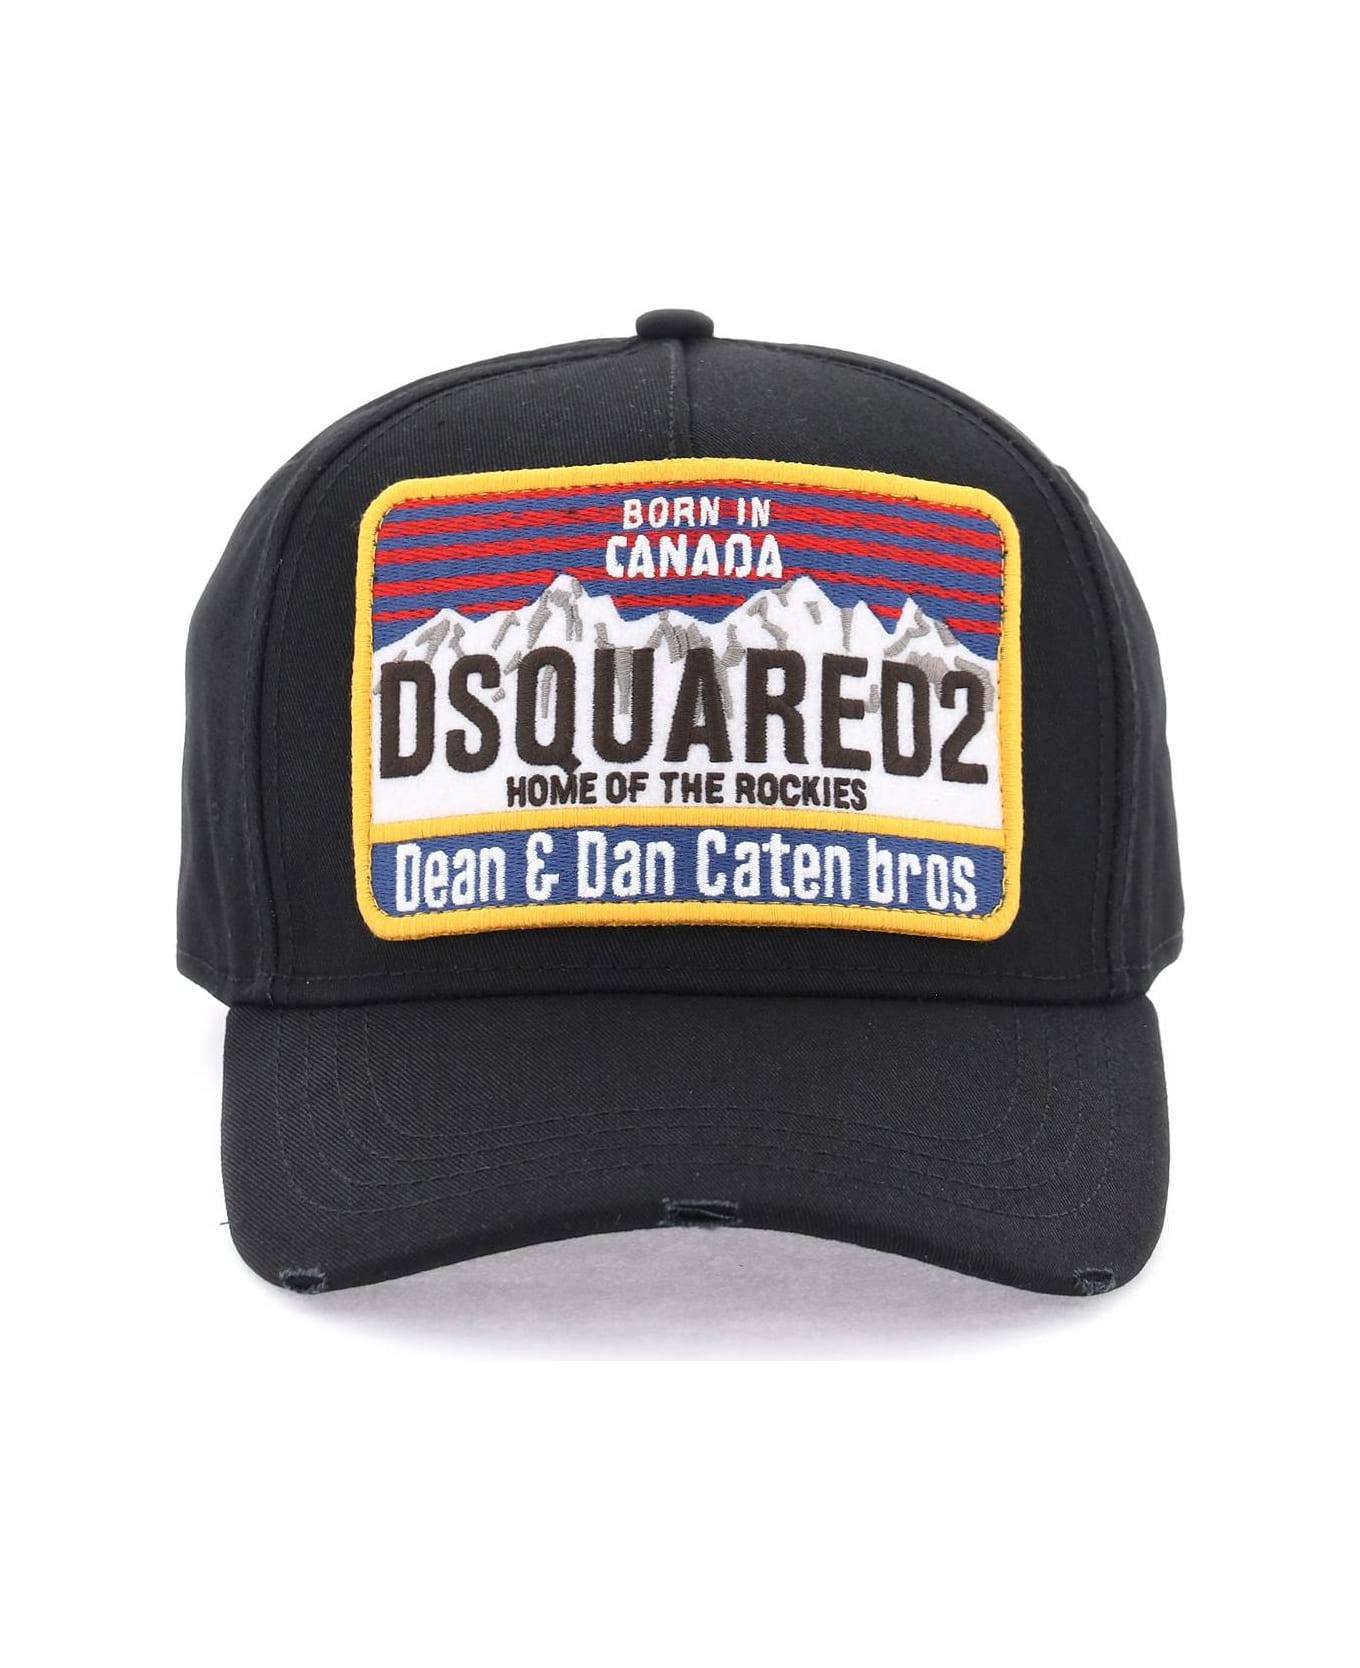 Dsquared2 Baseball Cap With Logoed Patch - BLACK (Black)